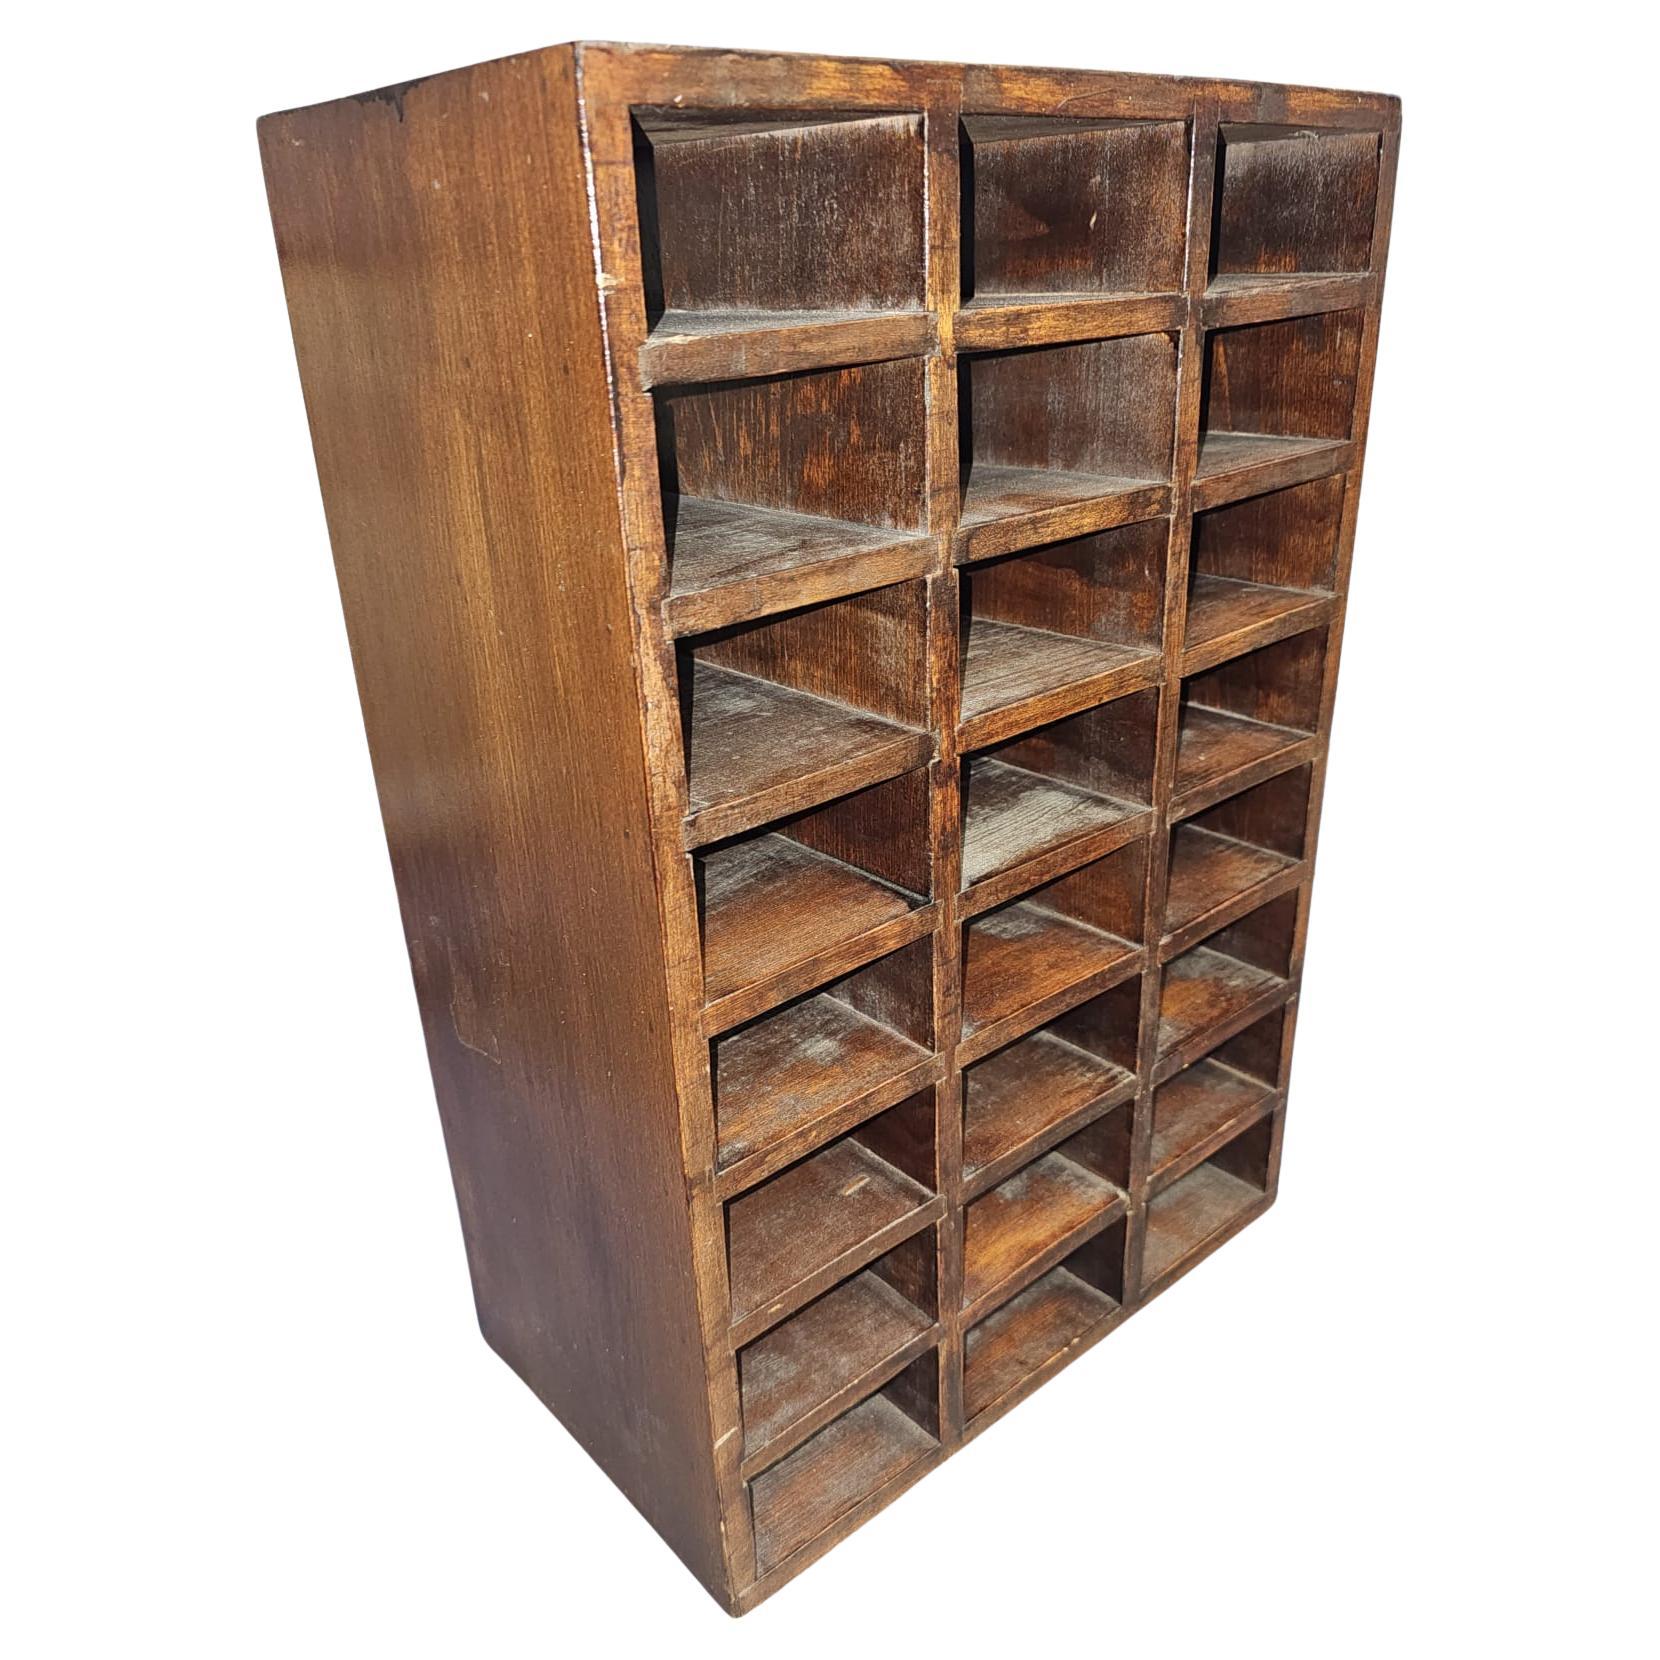 A Mid-Century Media and The Like Double Sided Storage Shelf in sturdy condition. 